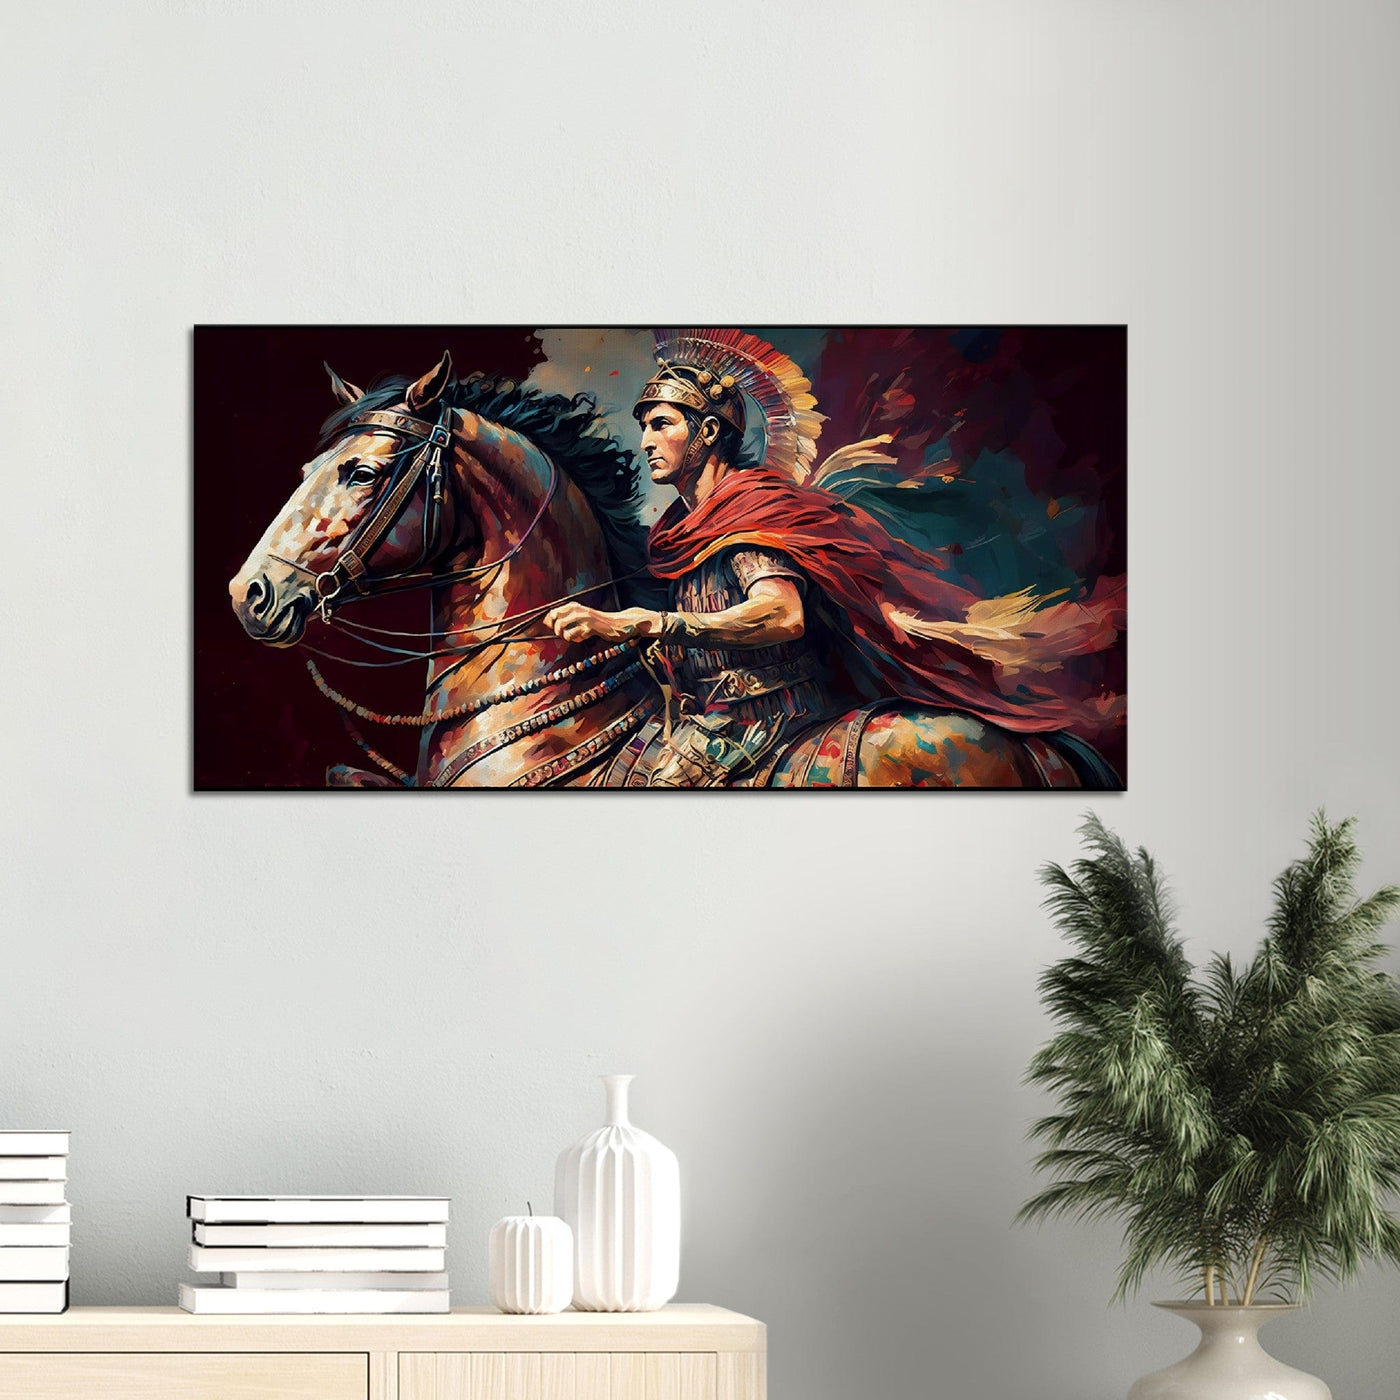 Augustus: The Architect of Rome - Oil Painting Printed Canvas. 50X100.